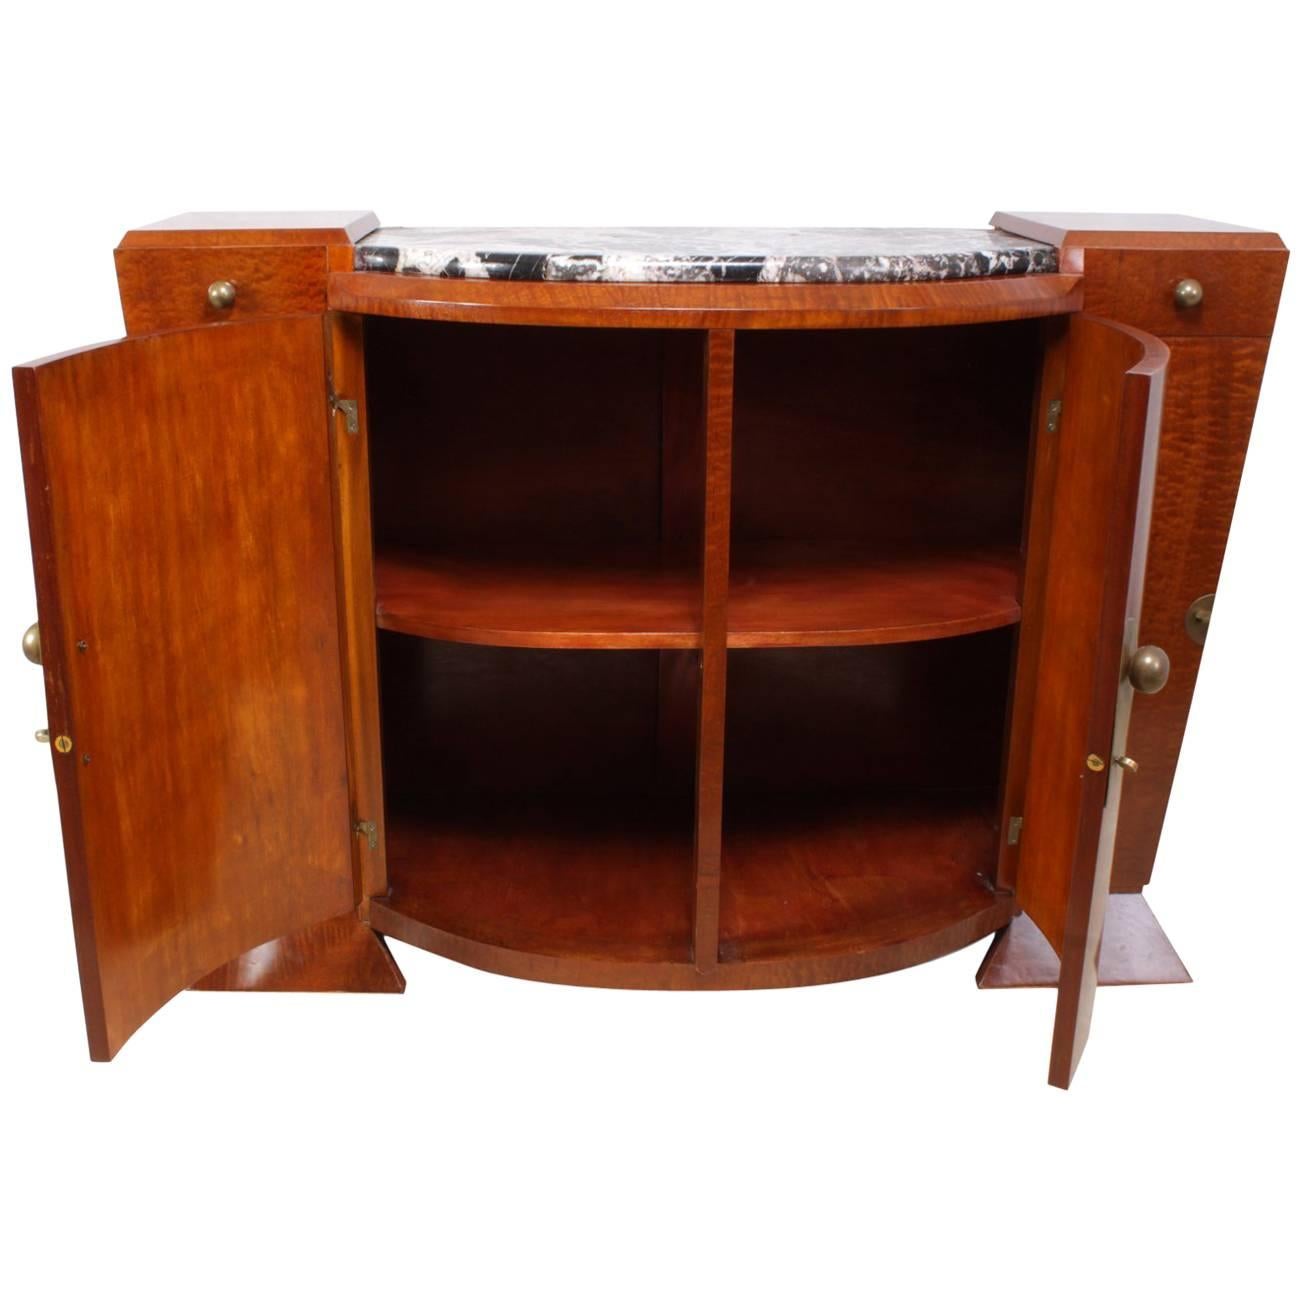 Art Deco Sideboard French c1920
a very french flamboyant shaped Art deco sideboard with bowed central doors and a marble top, the outside cupboards and drawers are fixed and do not open, the sideboard has been fully restored and hand polished and is